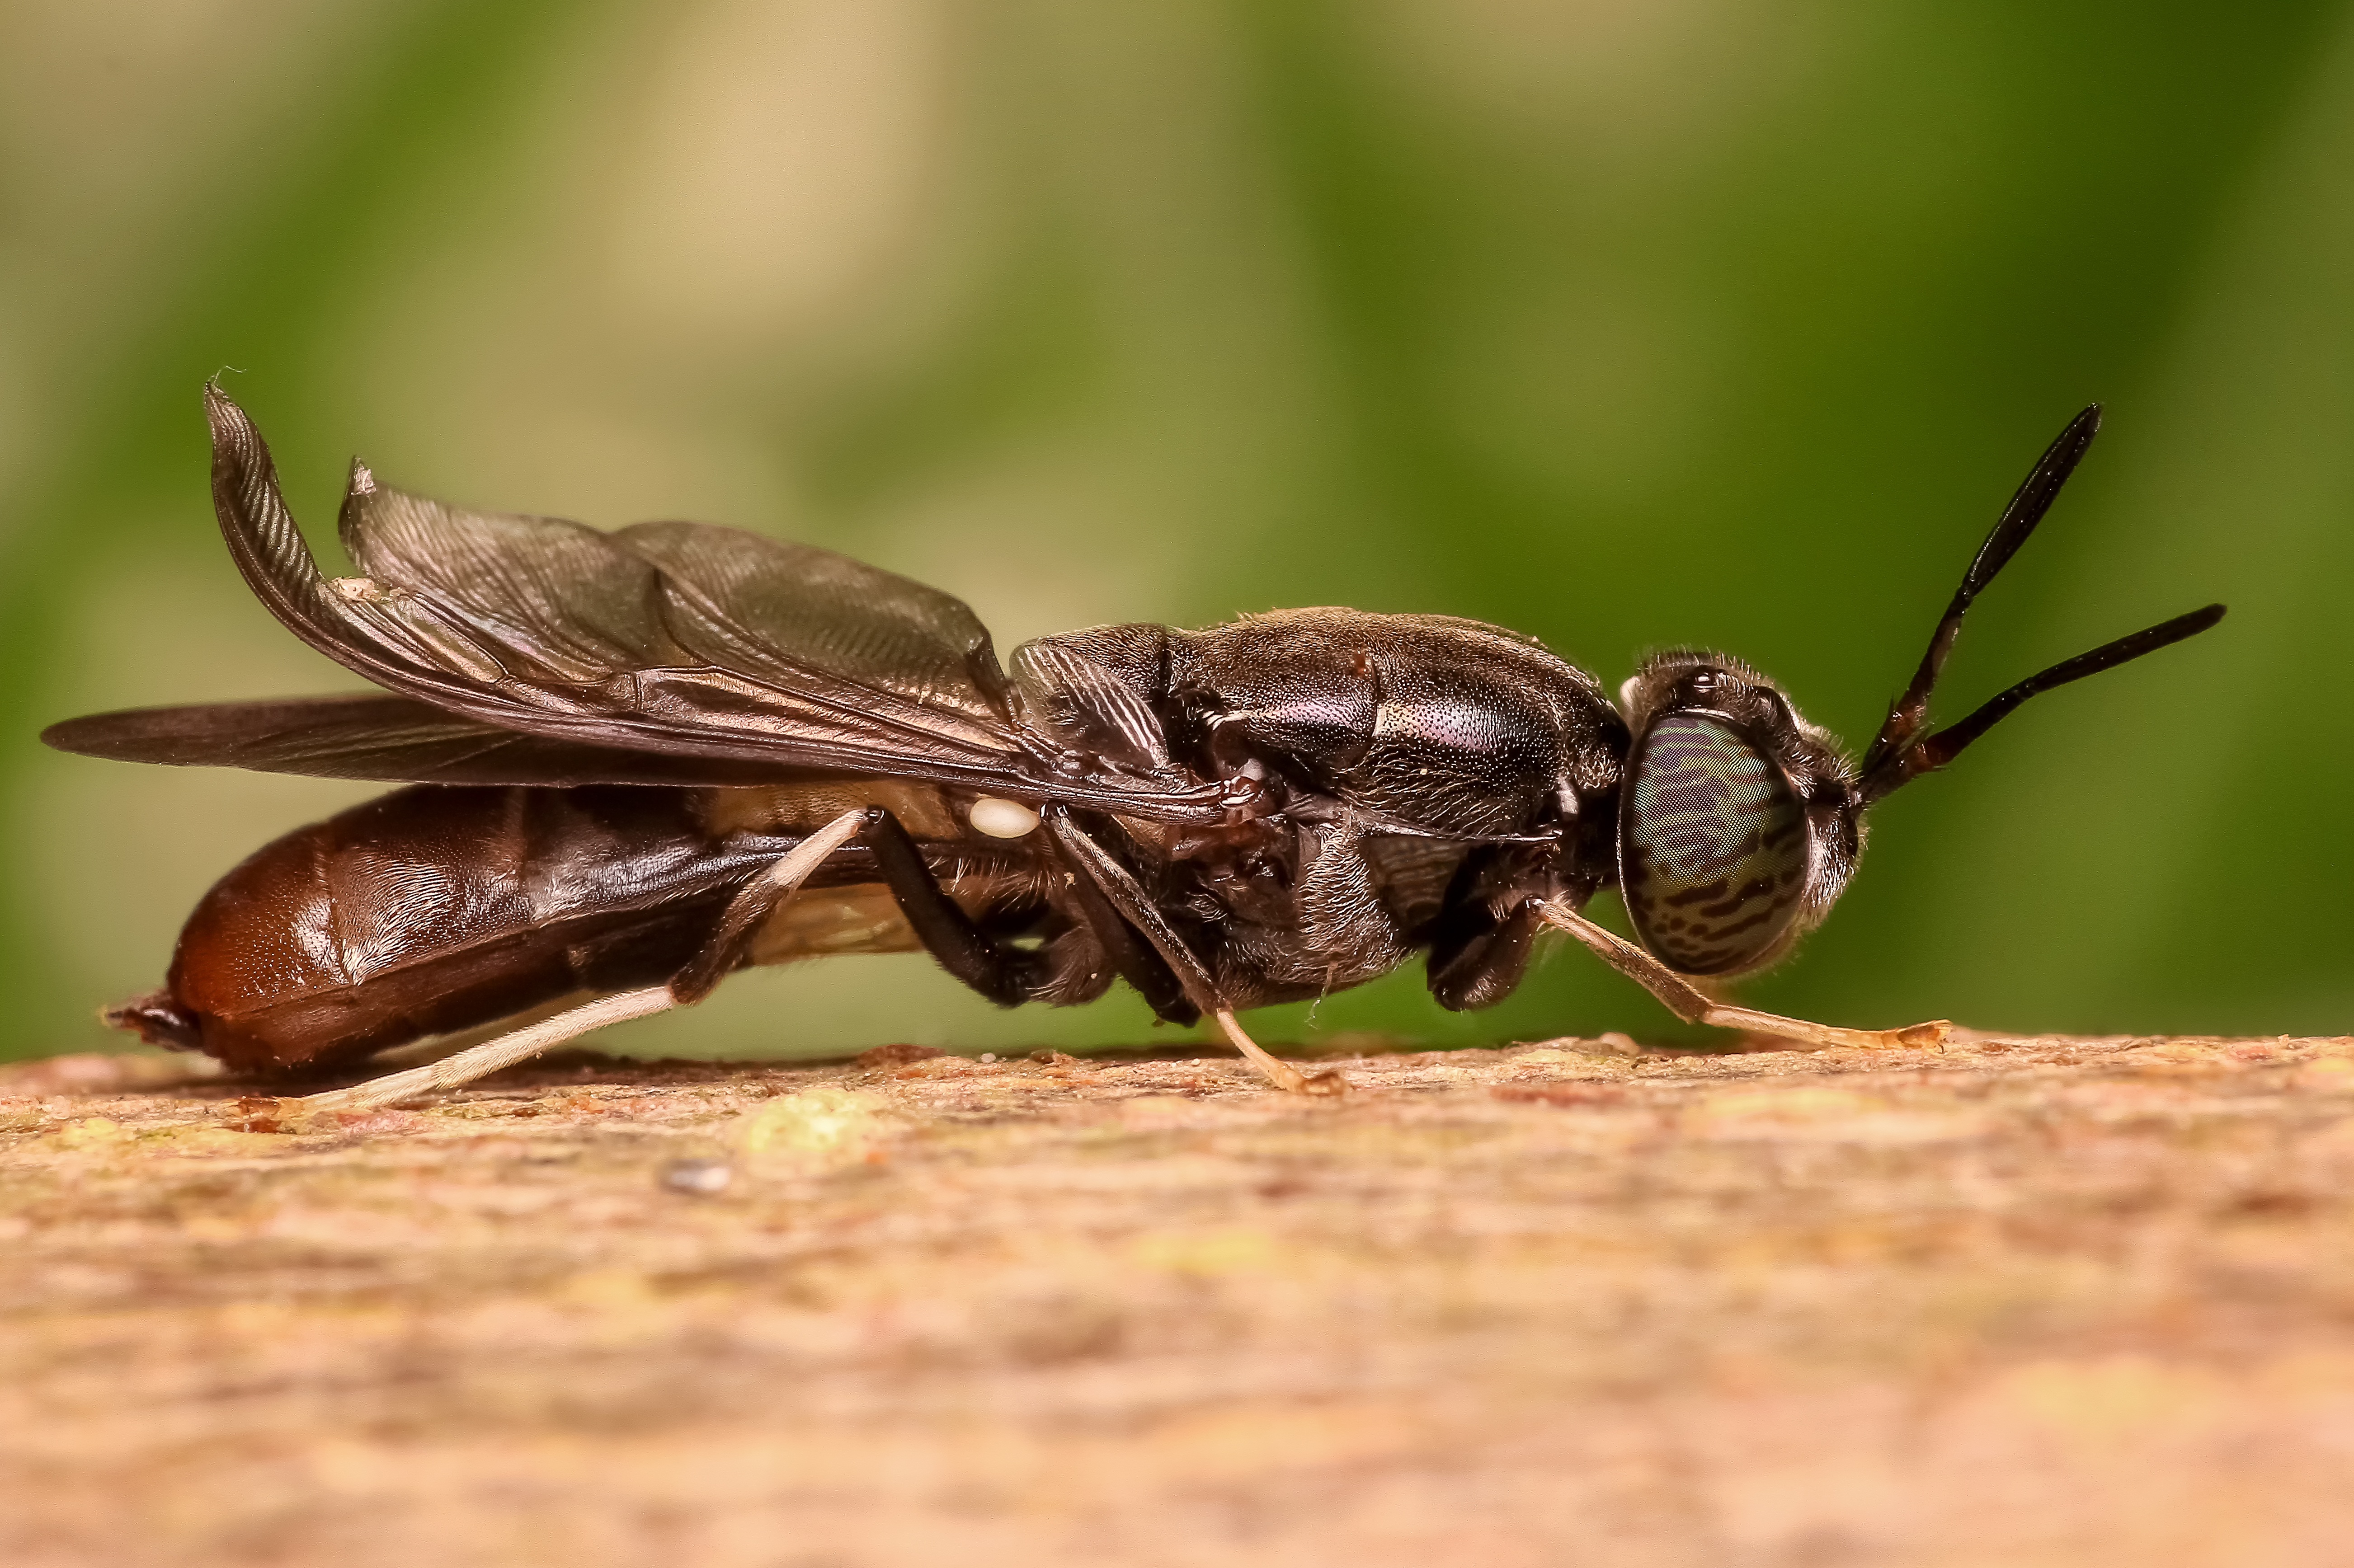 Soldier Fly, Fly, Focus, Insect, Nature, HQ Photo